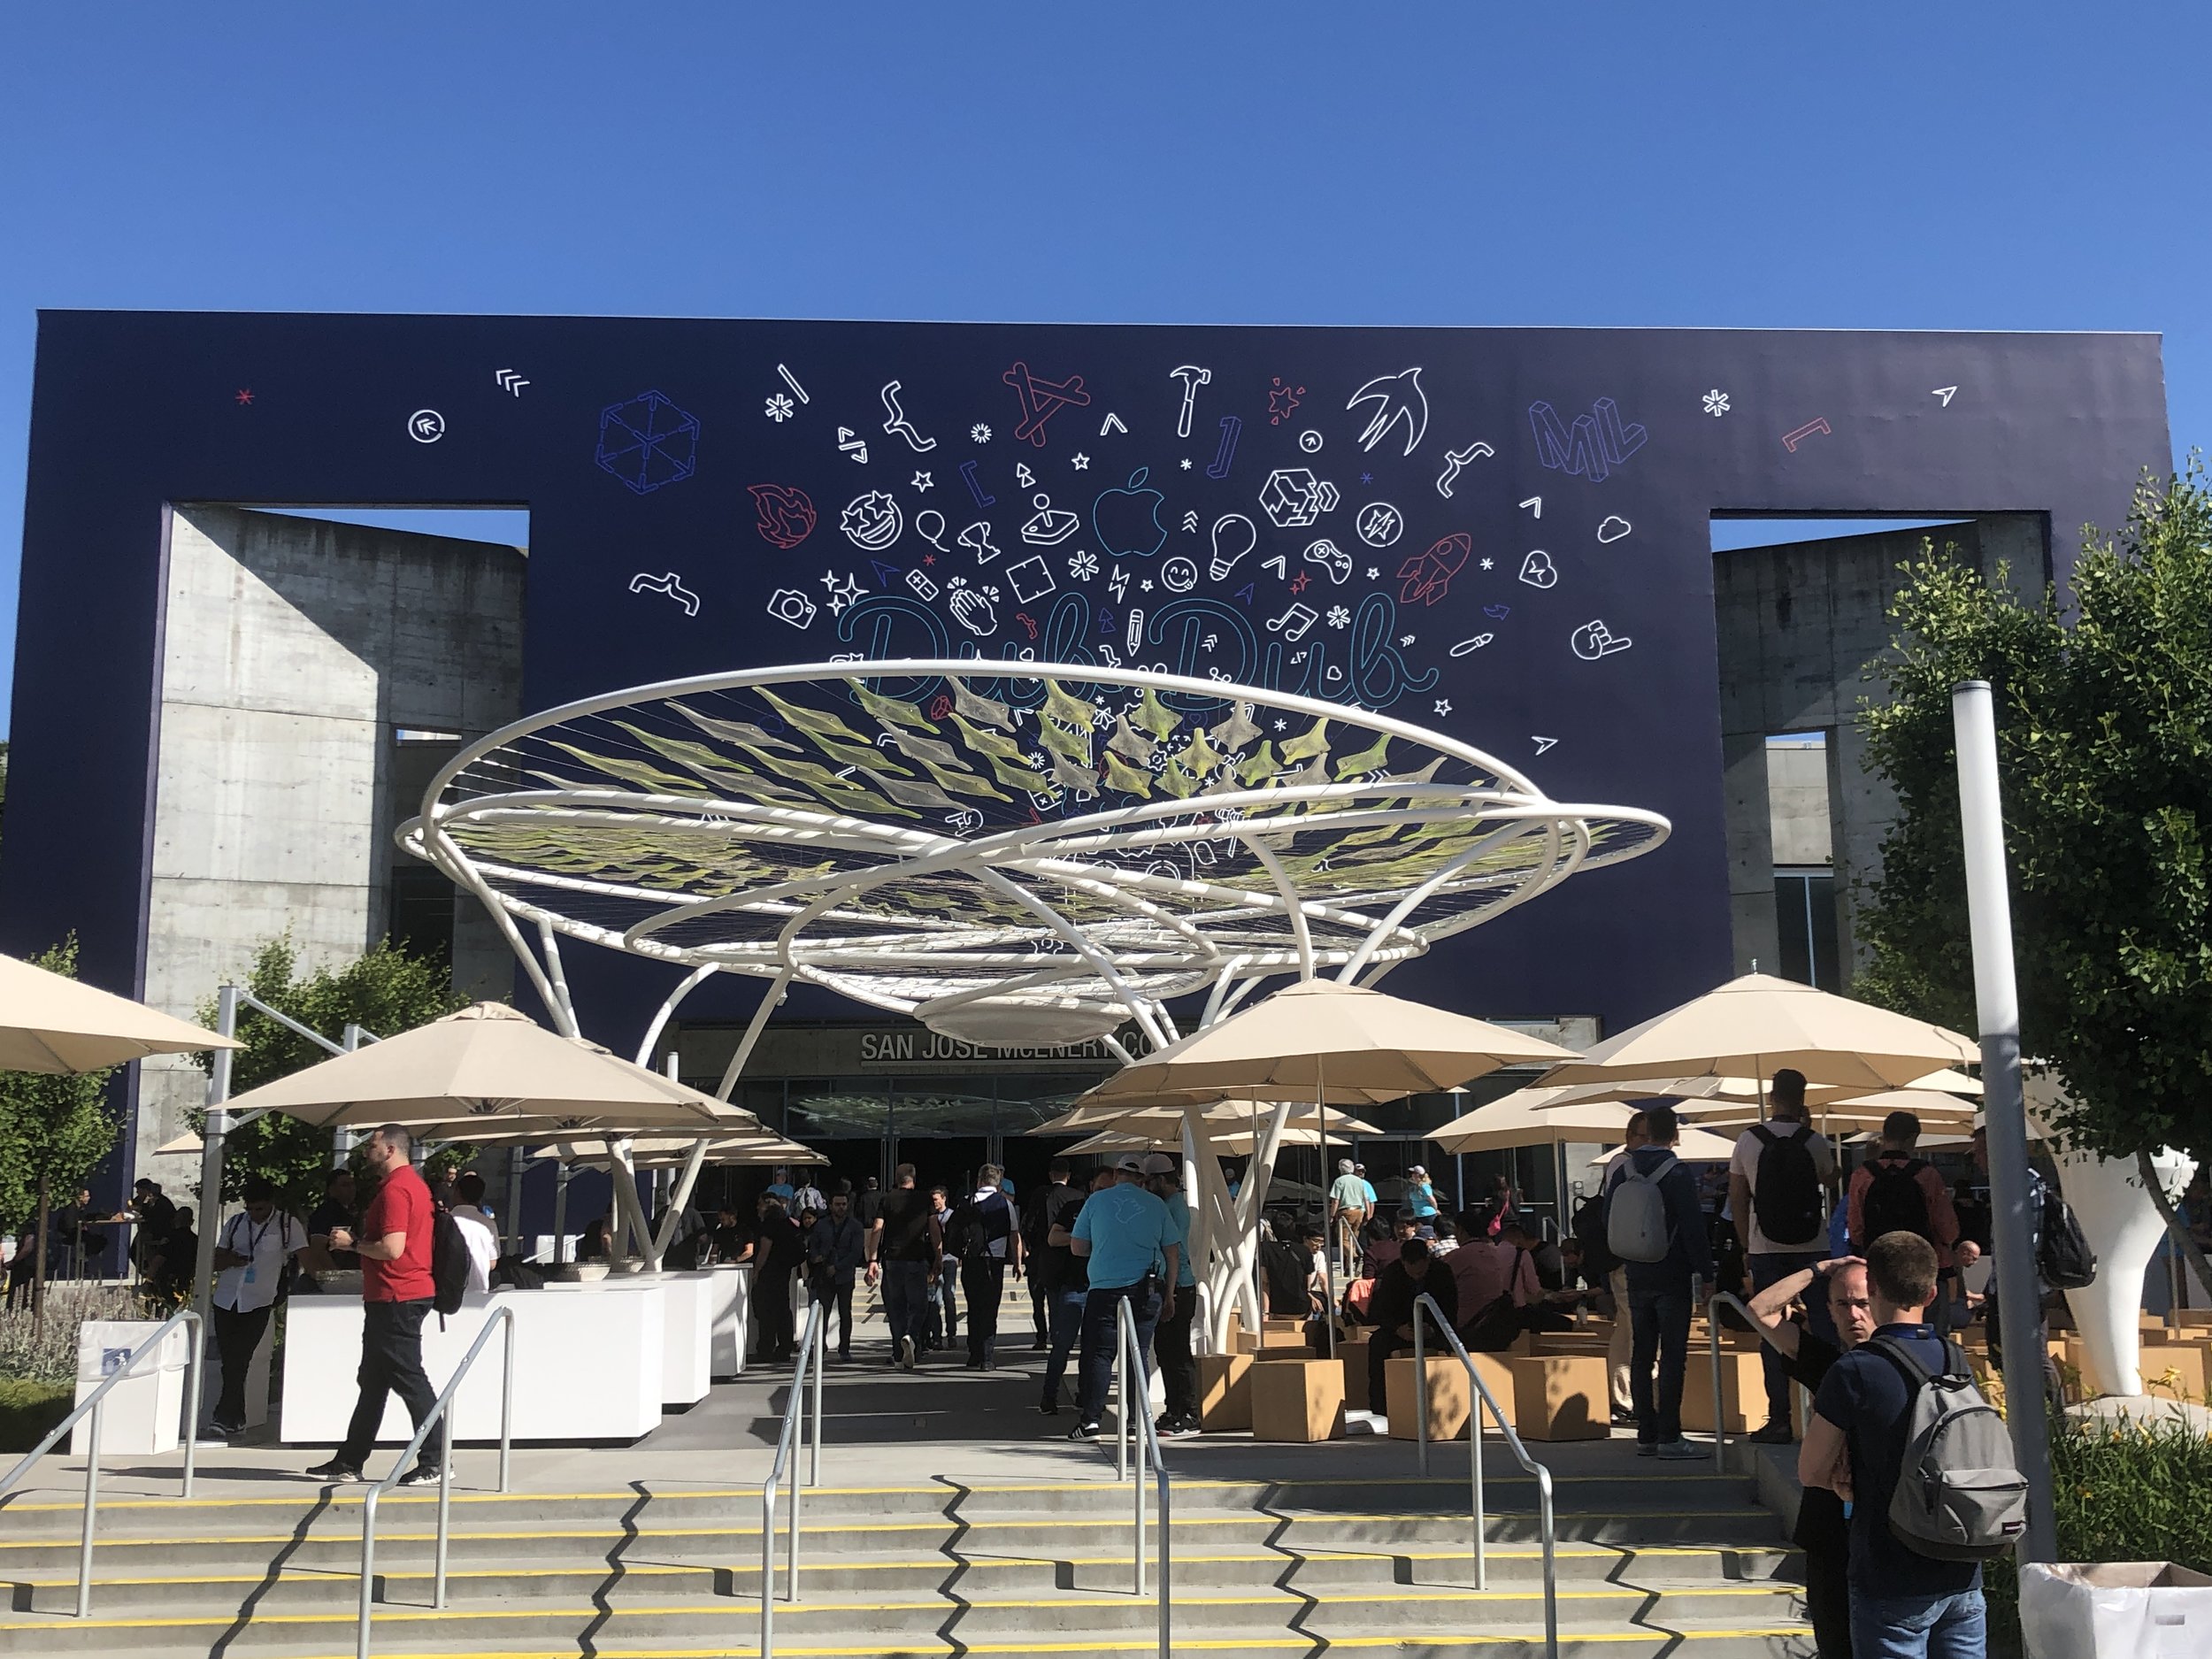 San Jose Convention Center Decked Out for WWDC